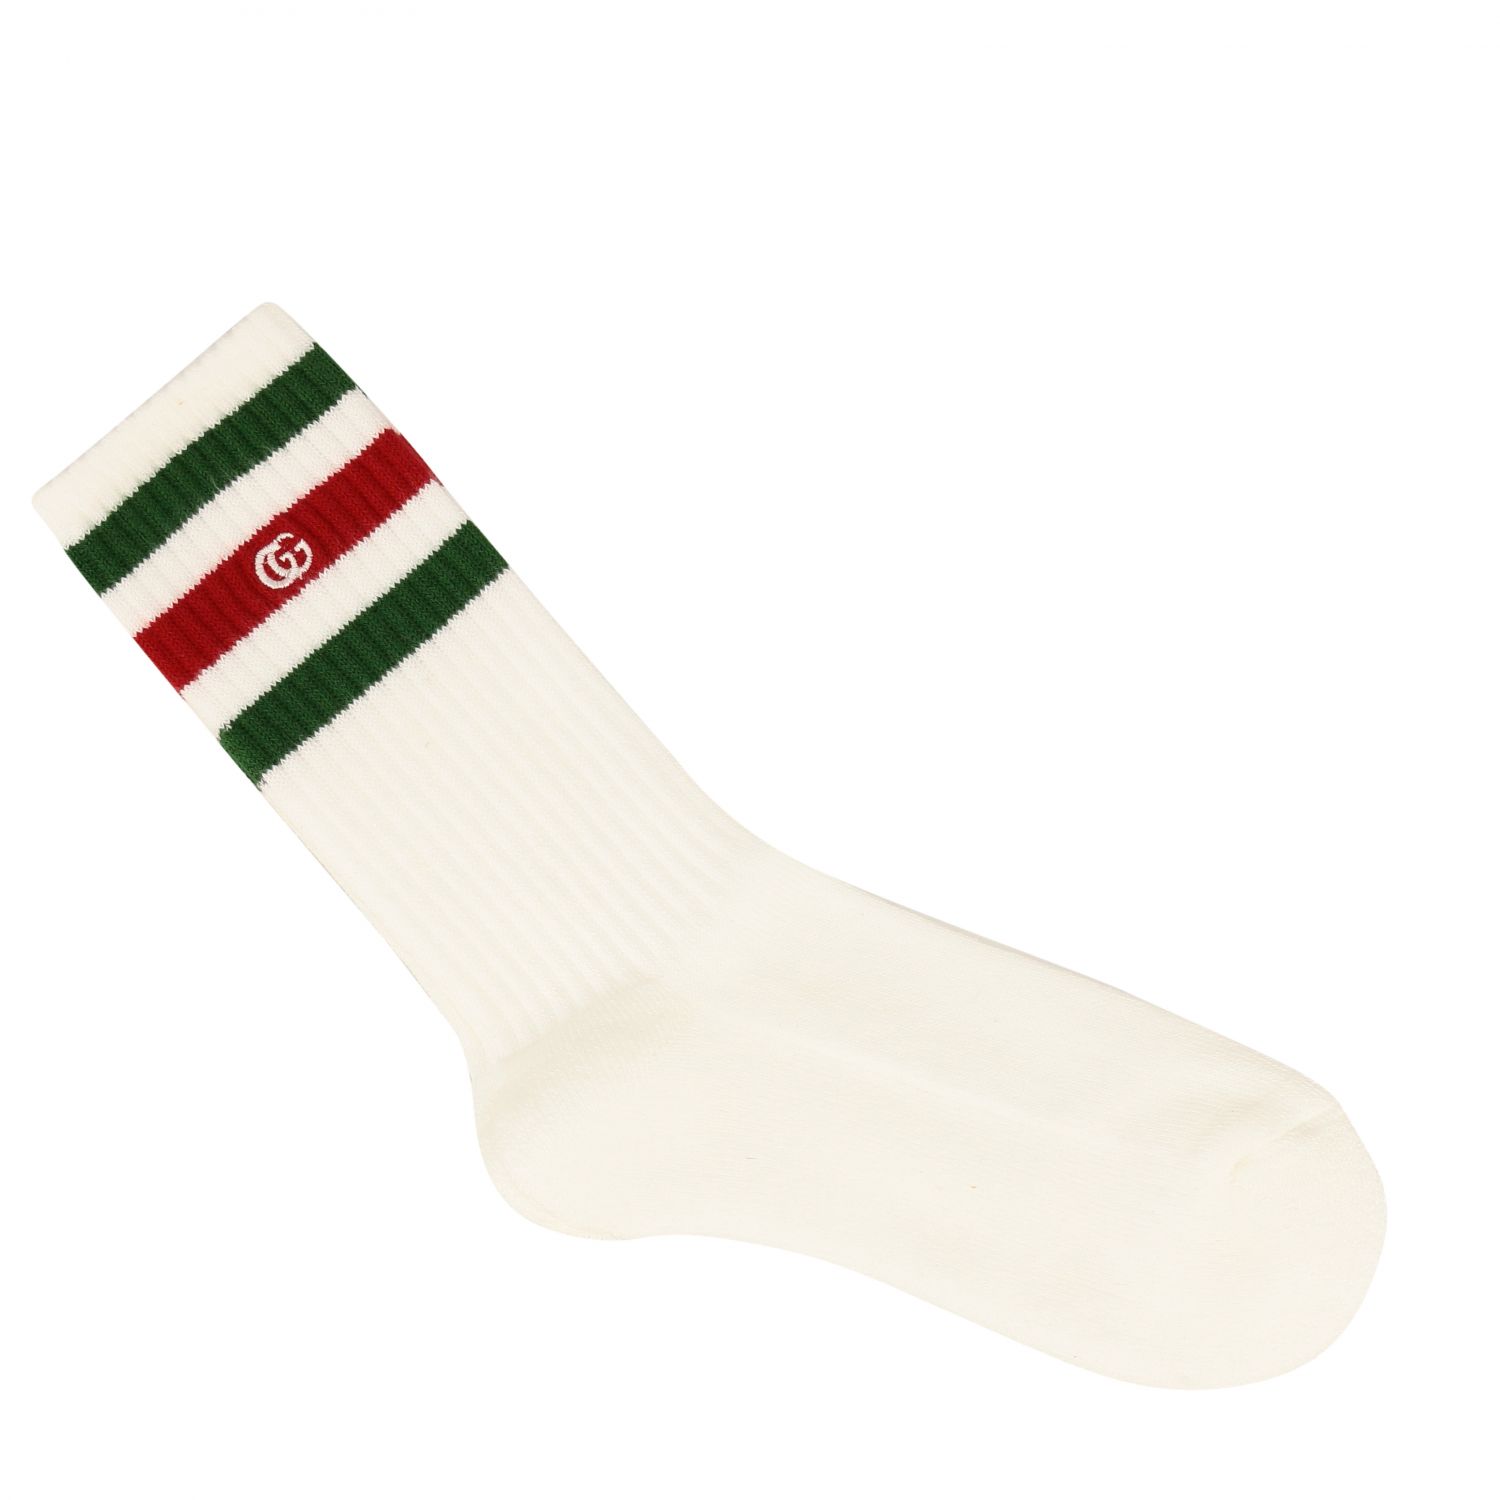 GUCCI: terry socks with web and logo motif - Green | Gucci socks 459532 ...